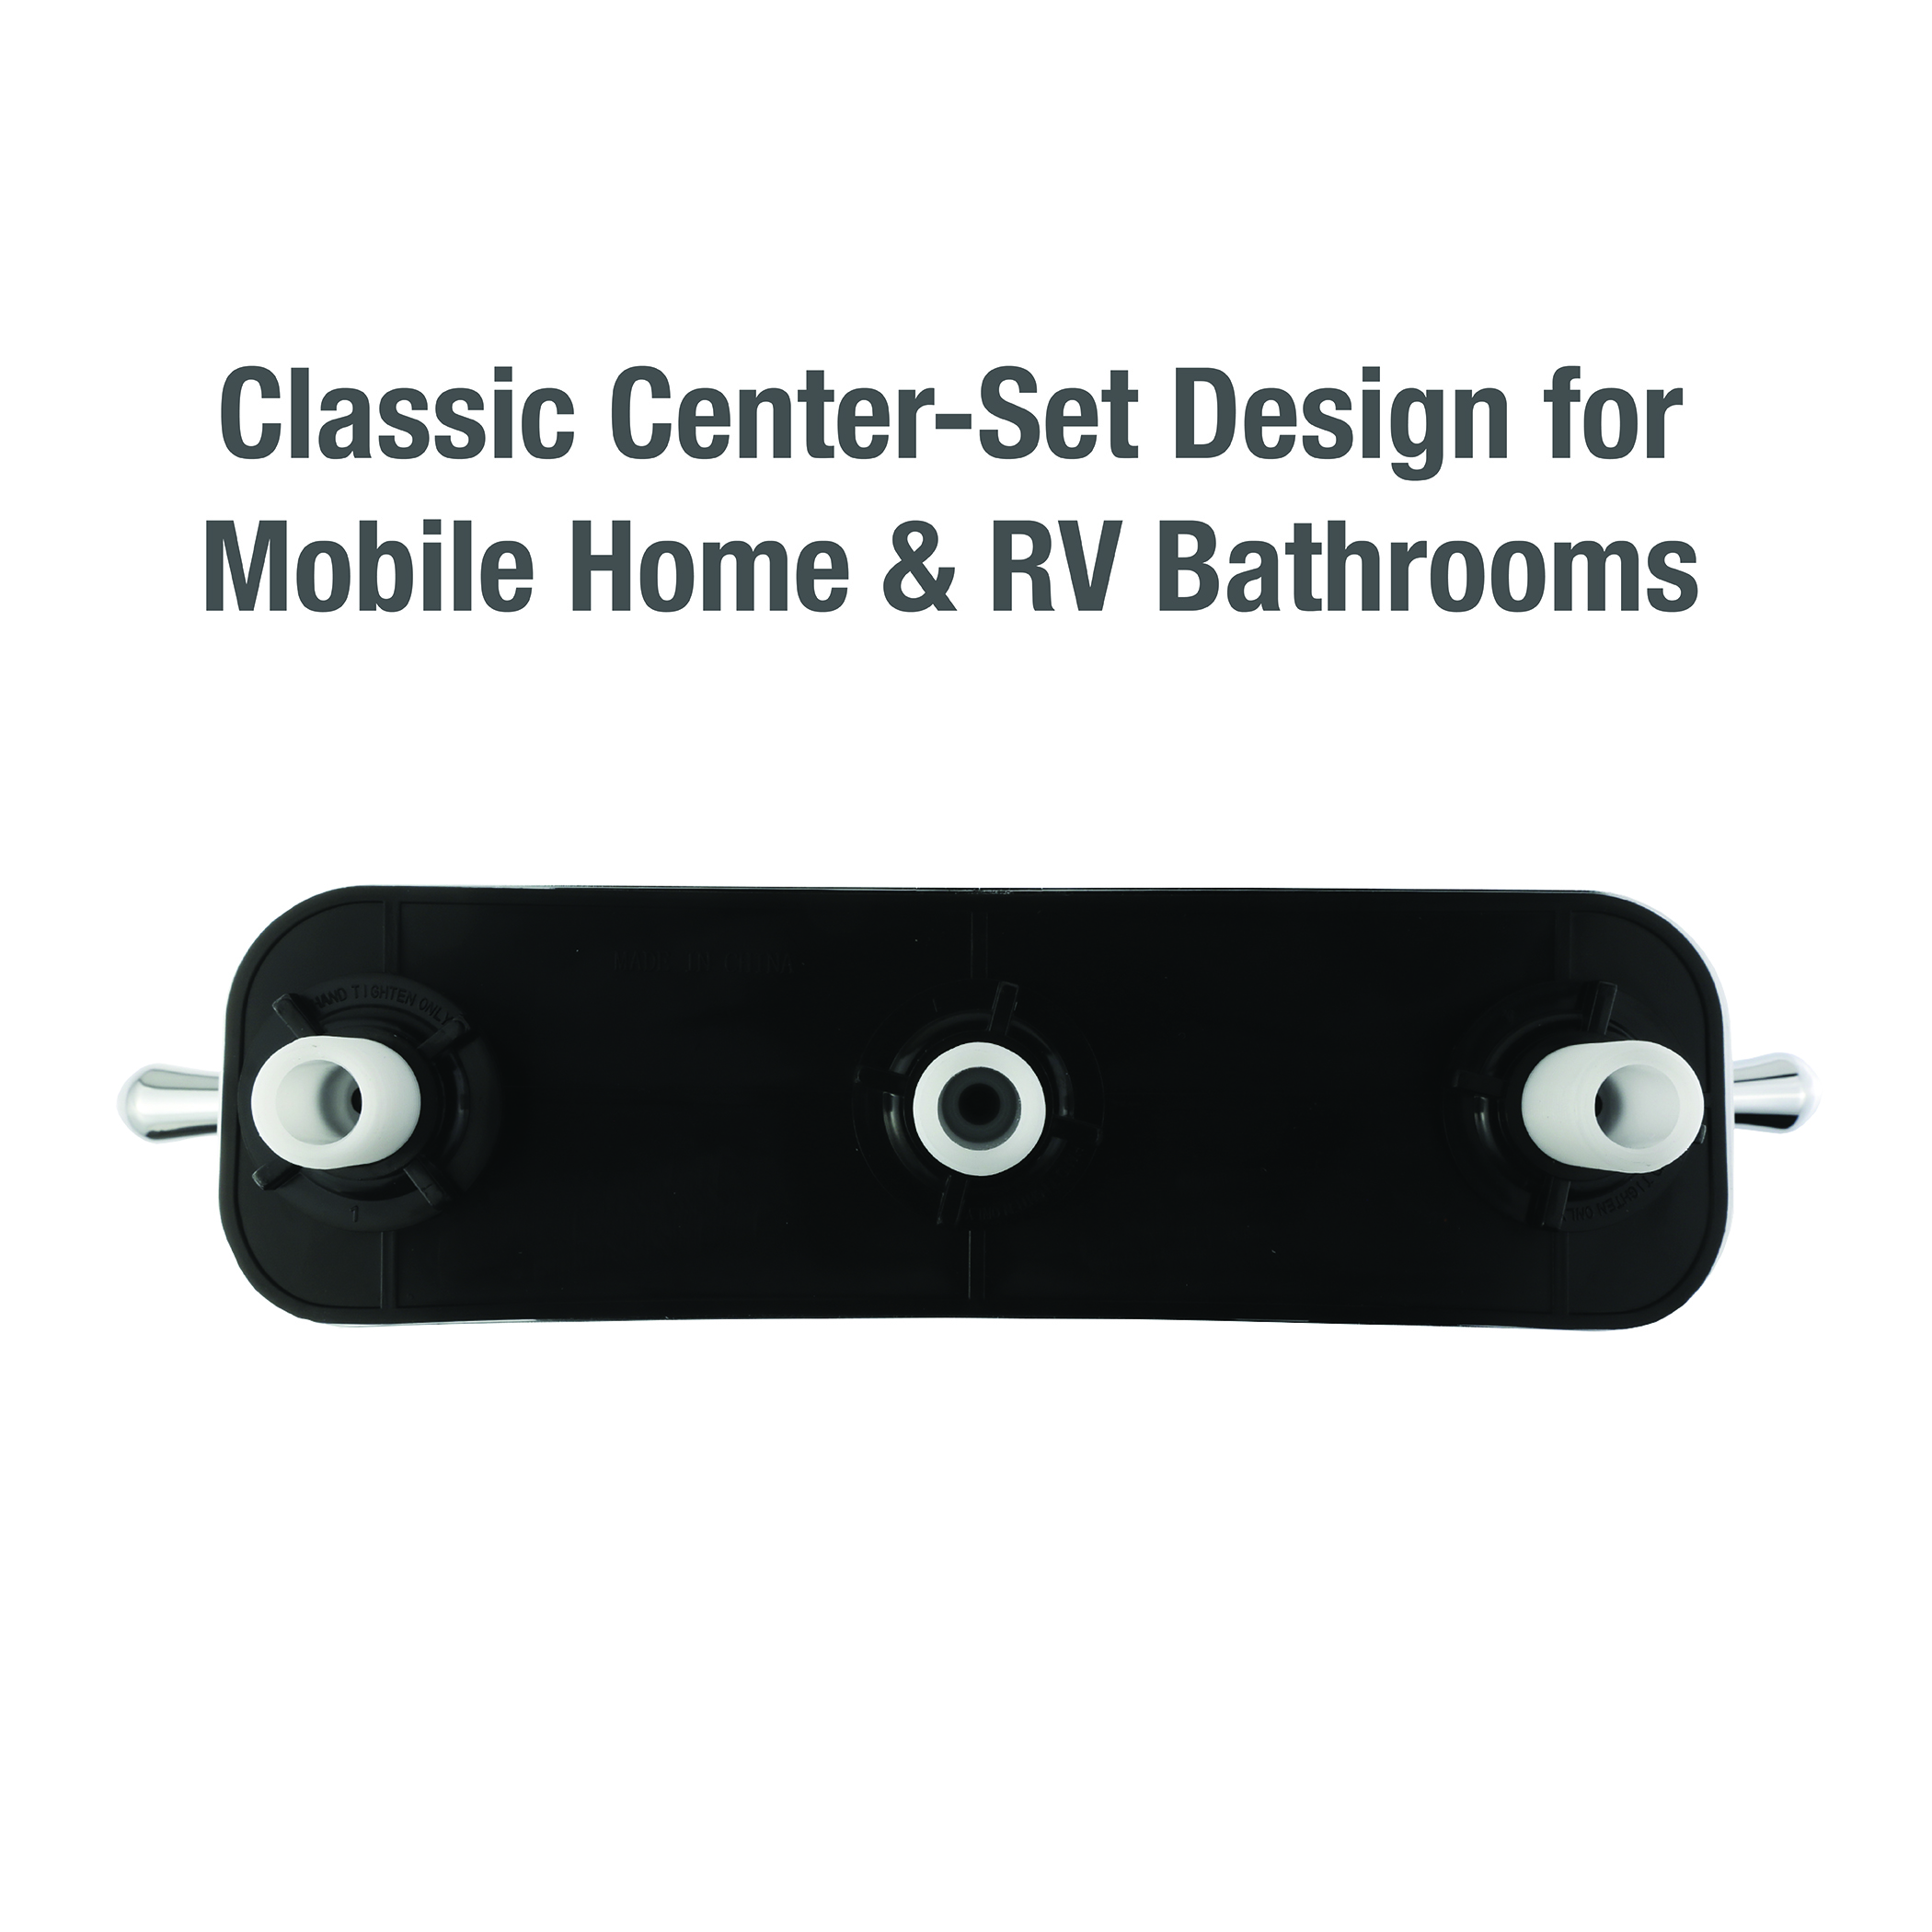 8 in. Mobile Home Center-Set Tub/Shower Faucet with Lever Handles in Chrome